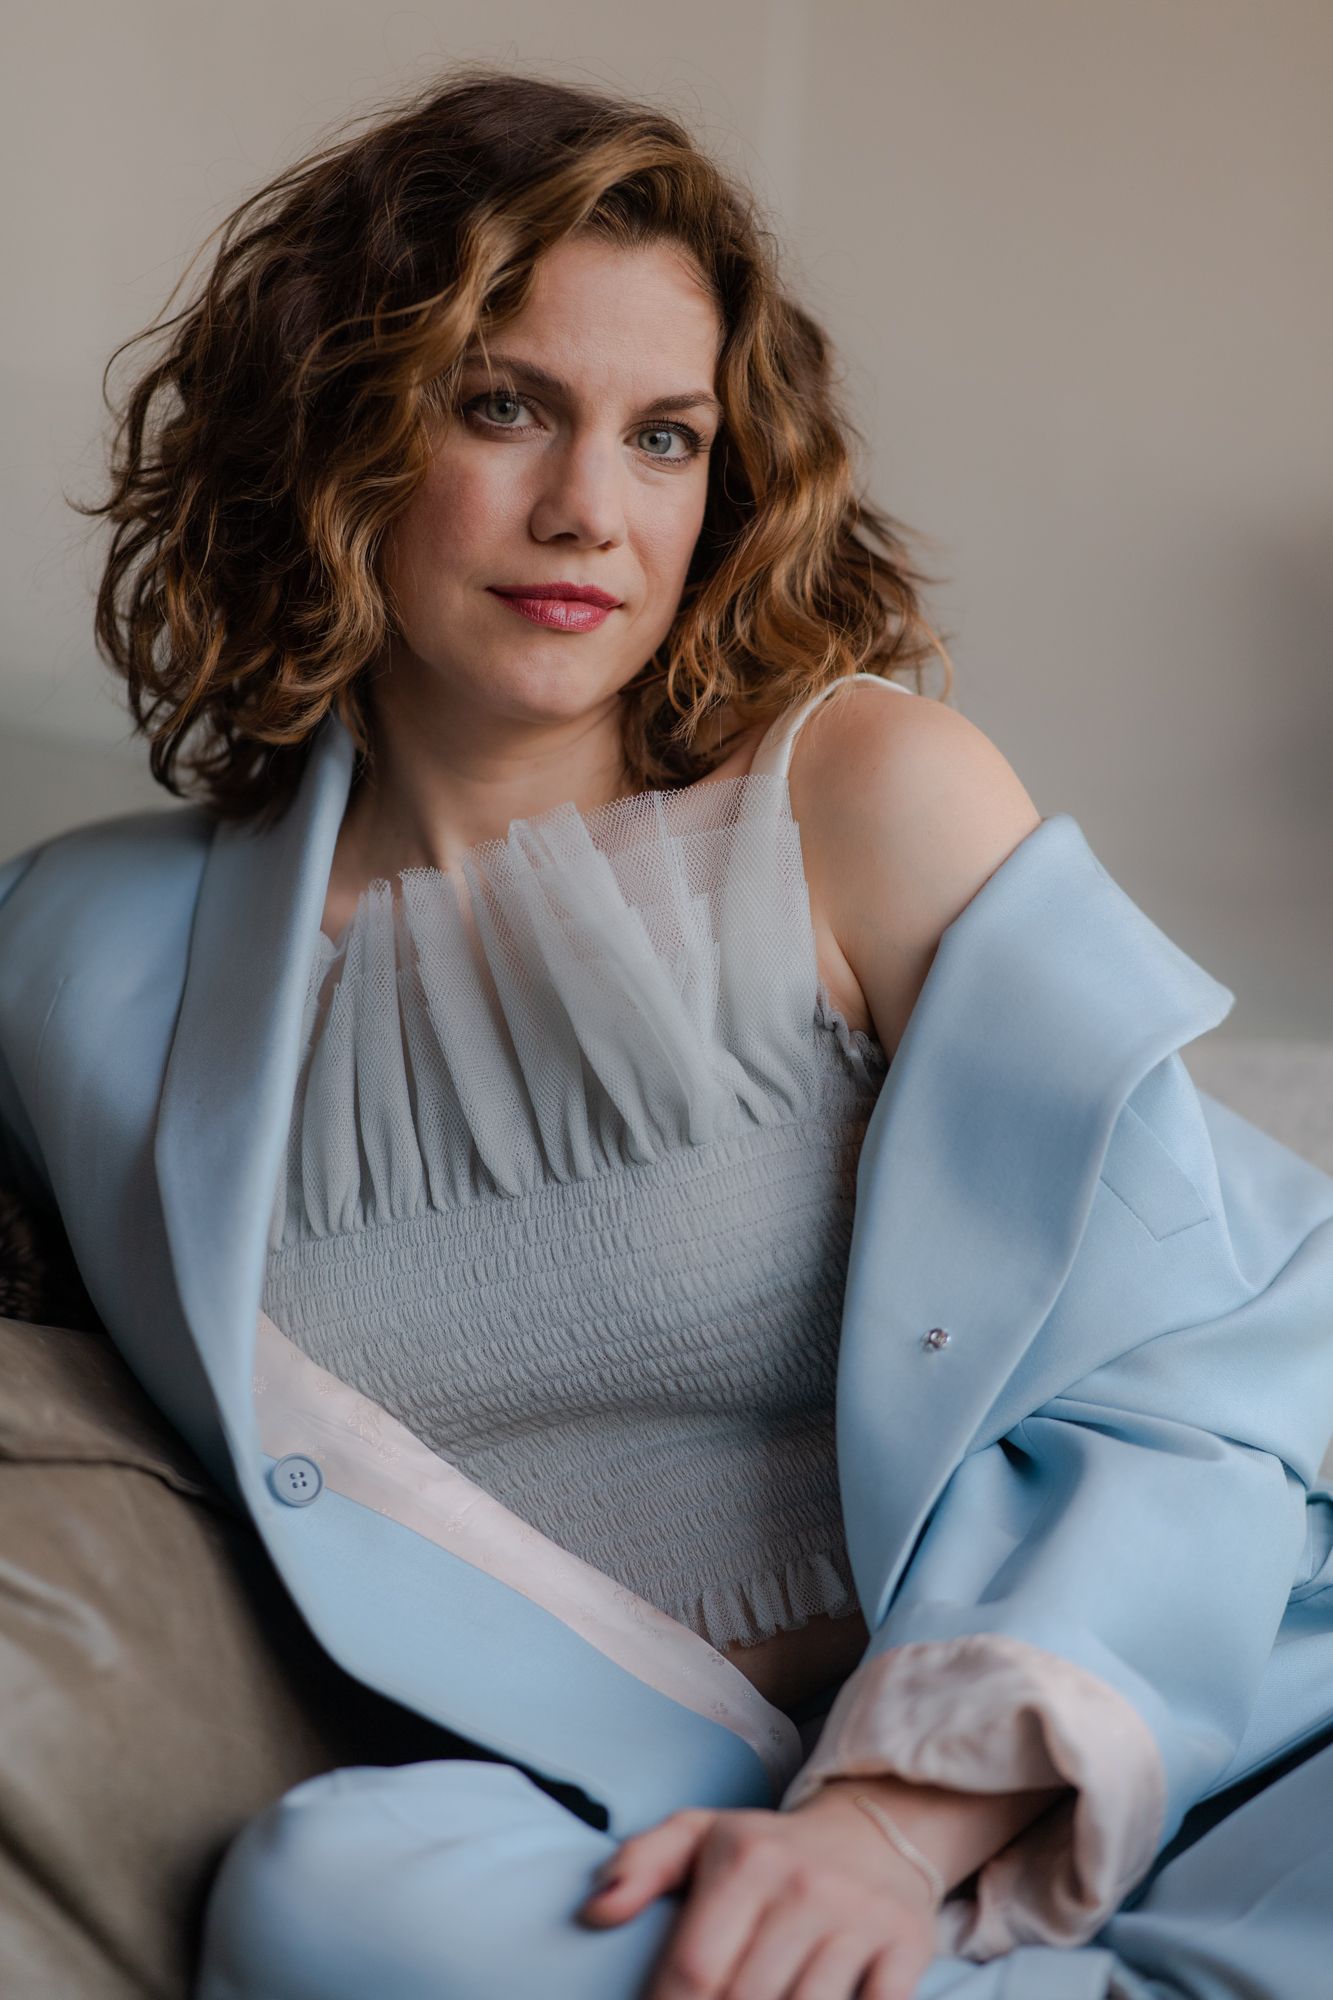 Anna Chlumsky On Inventing Anna, Playing Vivian Kent, And Veep image